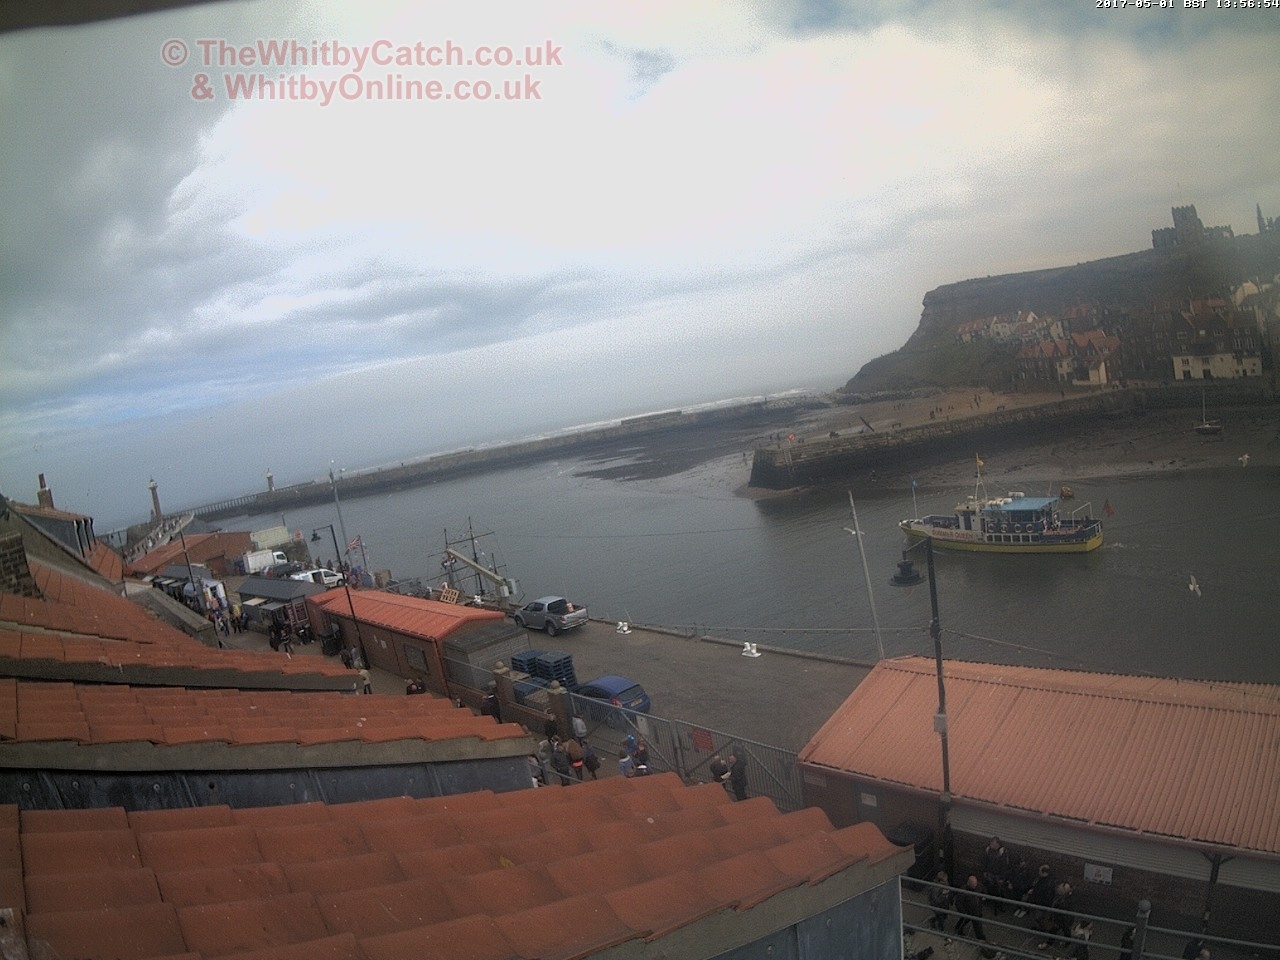 Whitby Mon 1st May 2017 13:57.